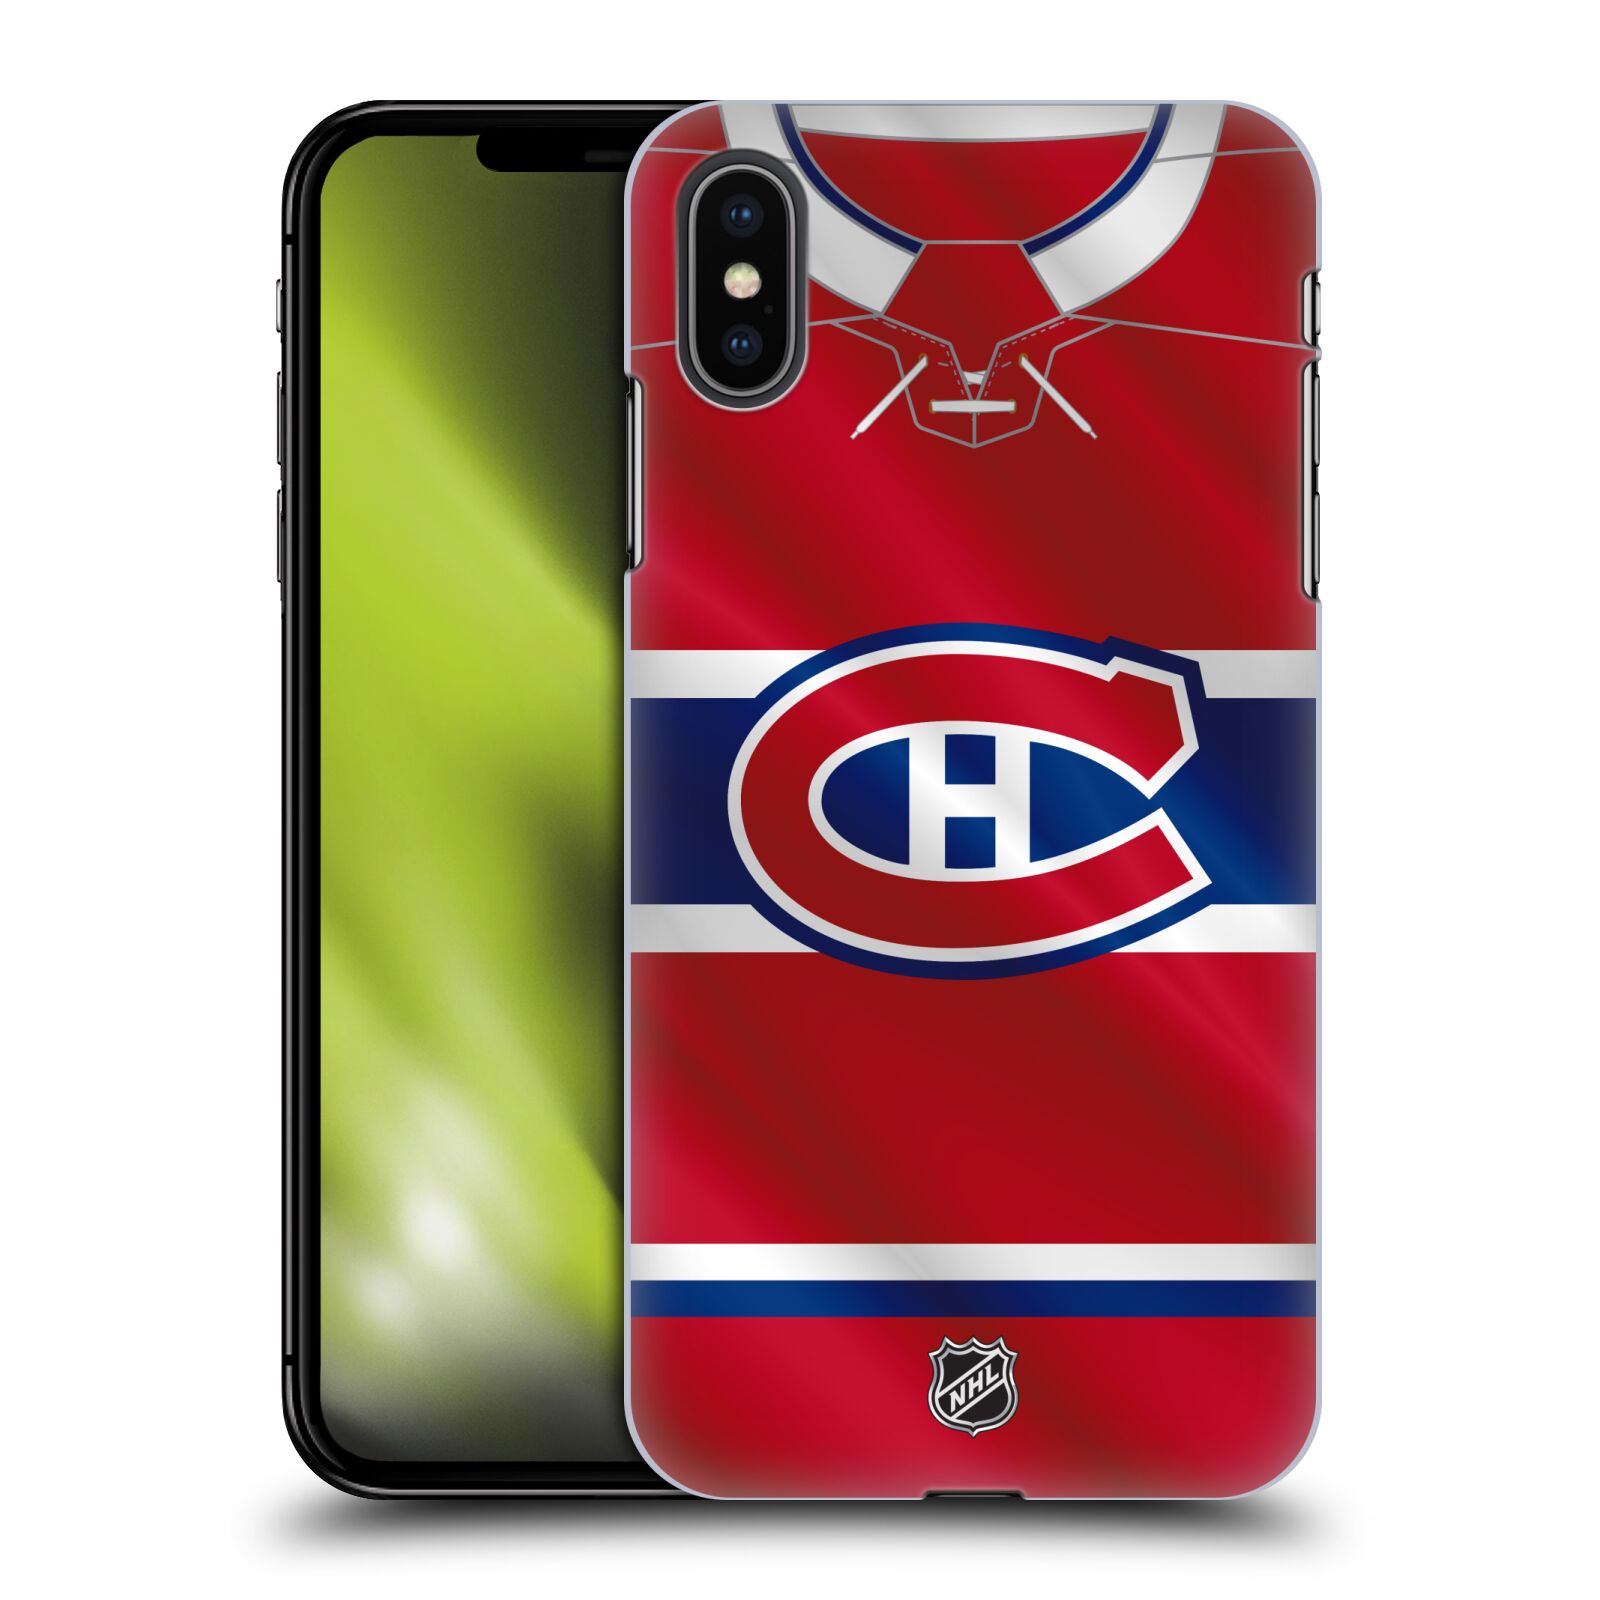 Pouzdro na mobil Apple Iphone XS MAX - HEAD CASE - Hokej NHL - Montreal Canadiens - Dres